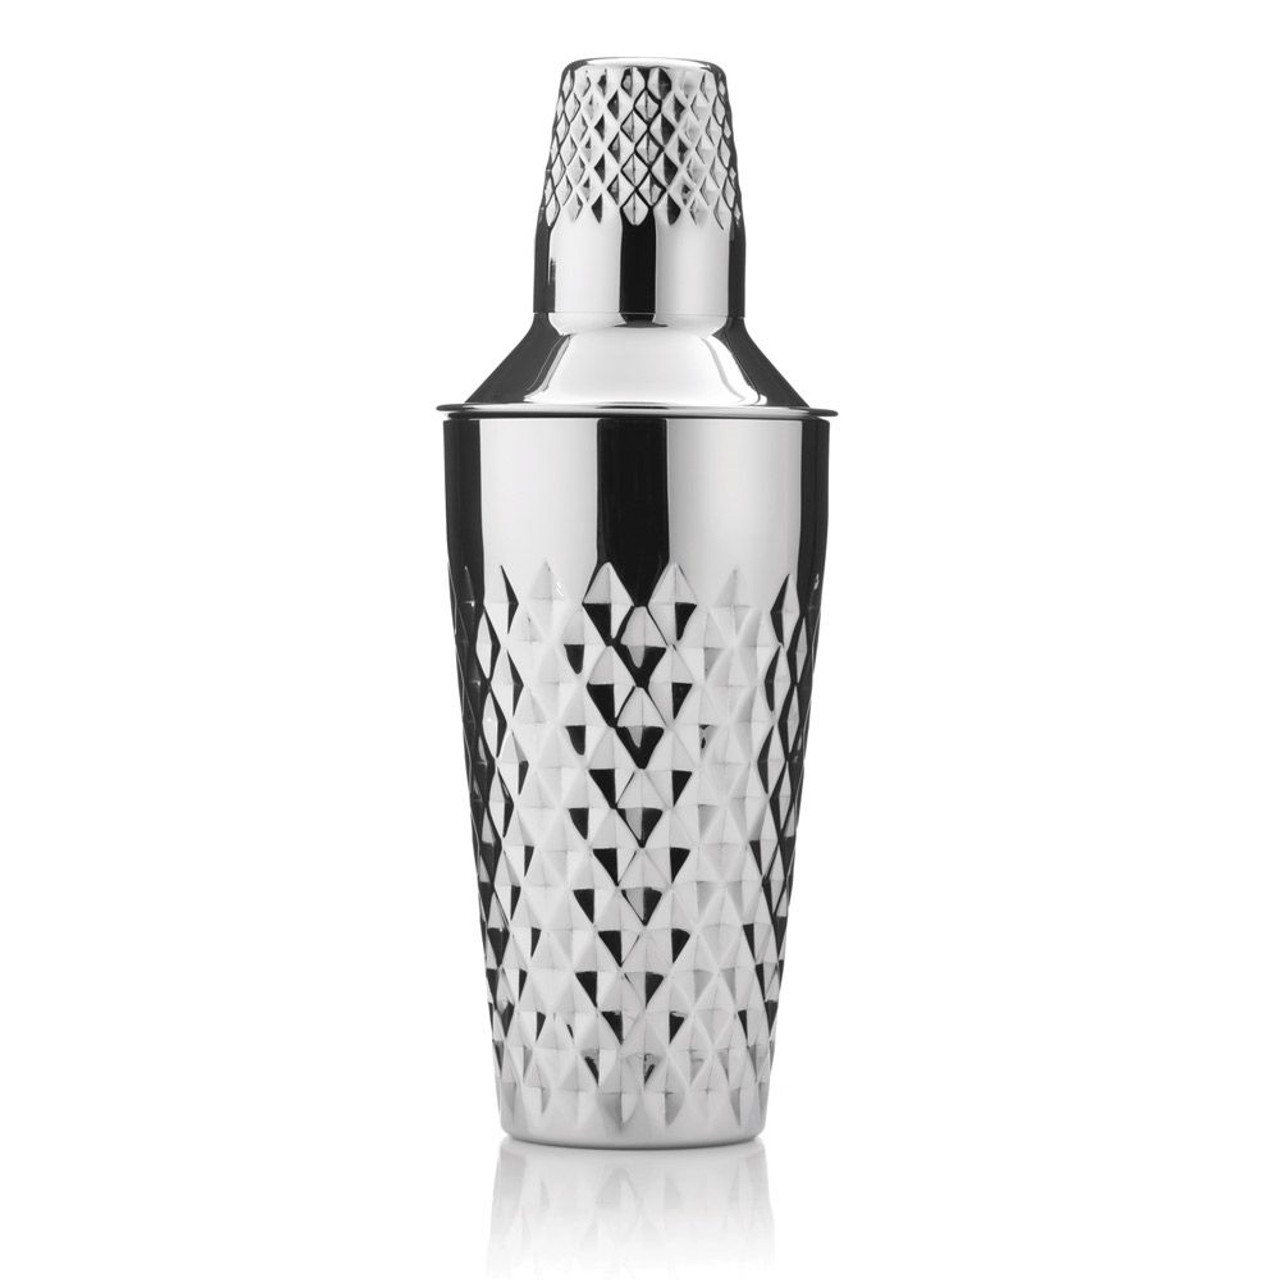 Cocktail Shaker, 16 Oz, Premium Stainless Steel Double Wall Insulated Drink  Shaker with Built in Bartender Strainer (Professional Bar Tool)